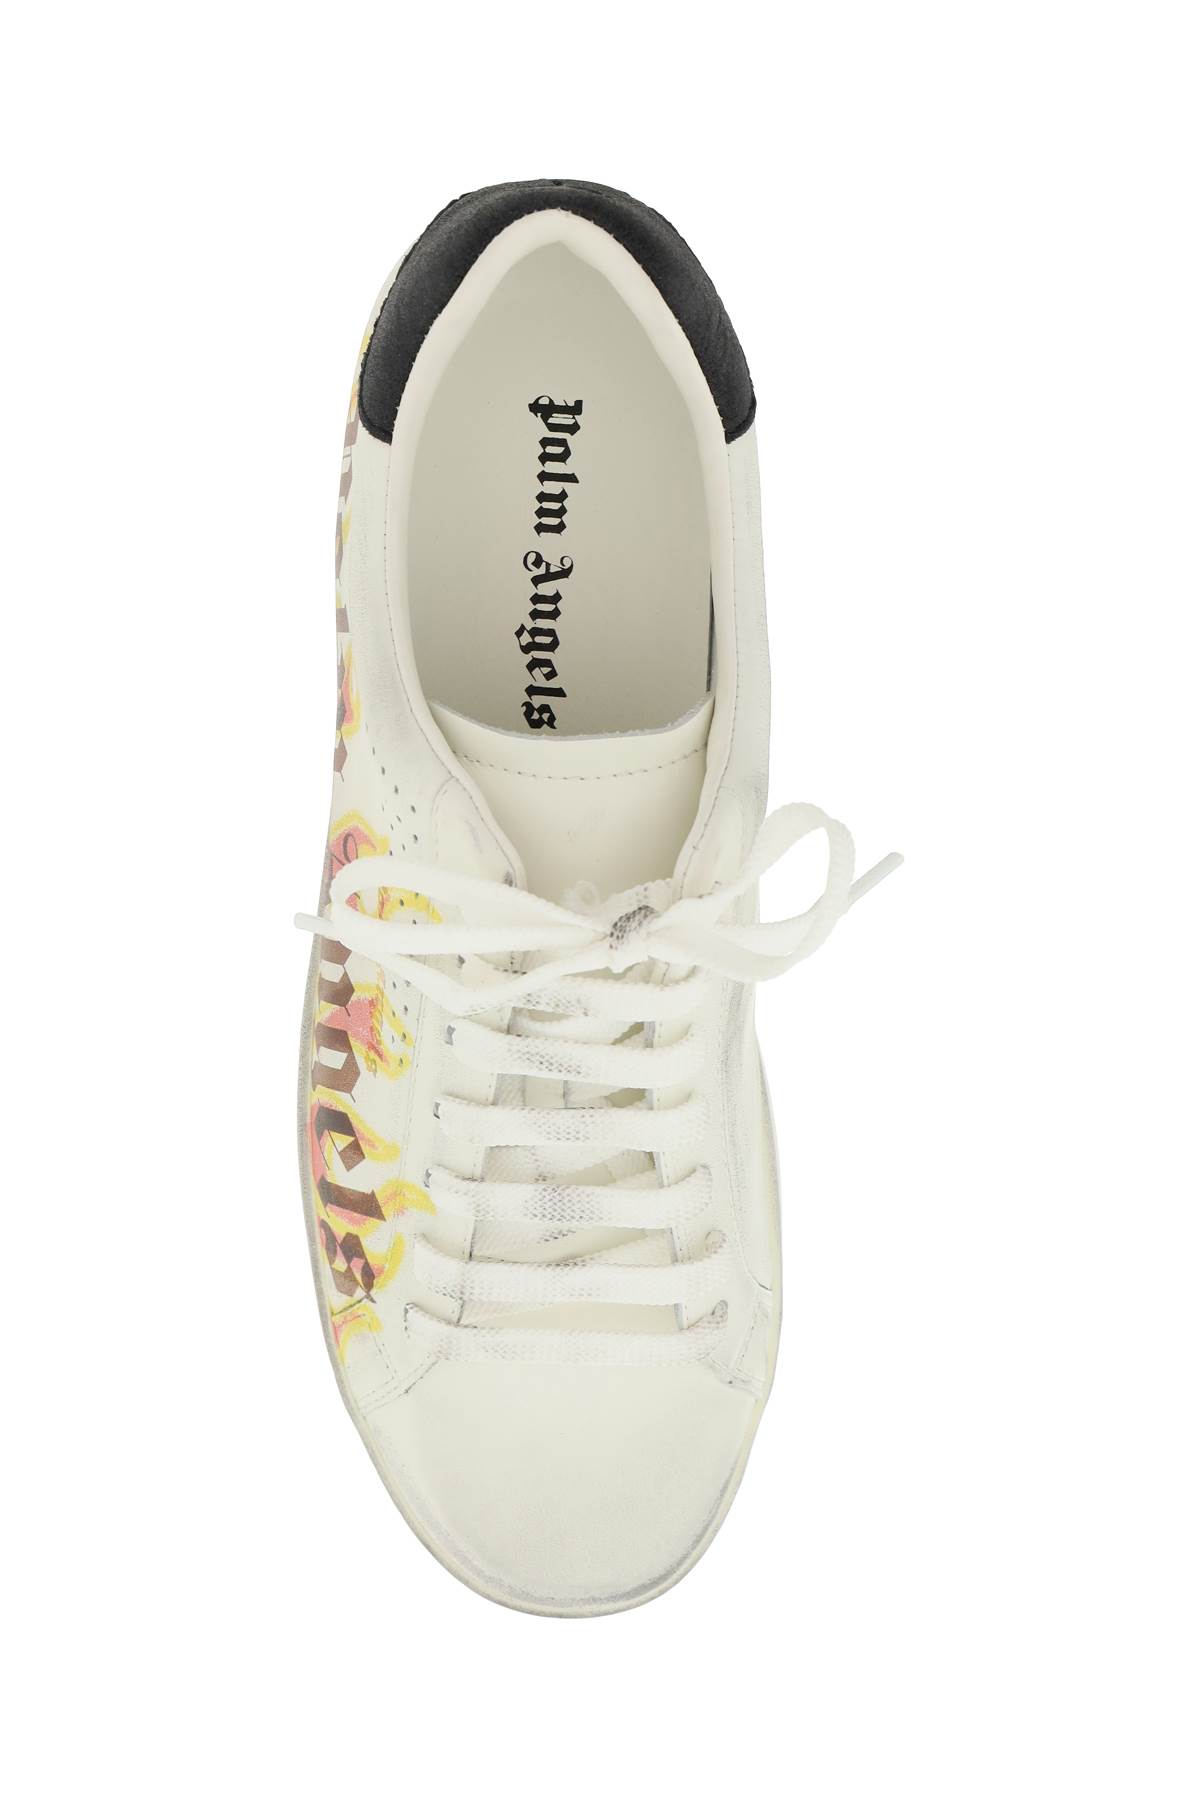 Shop Palm Angels Flame Print Palm One Sneakers